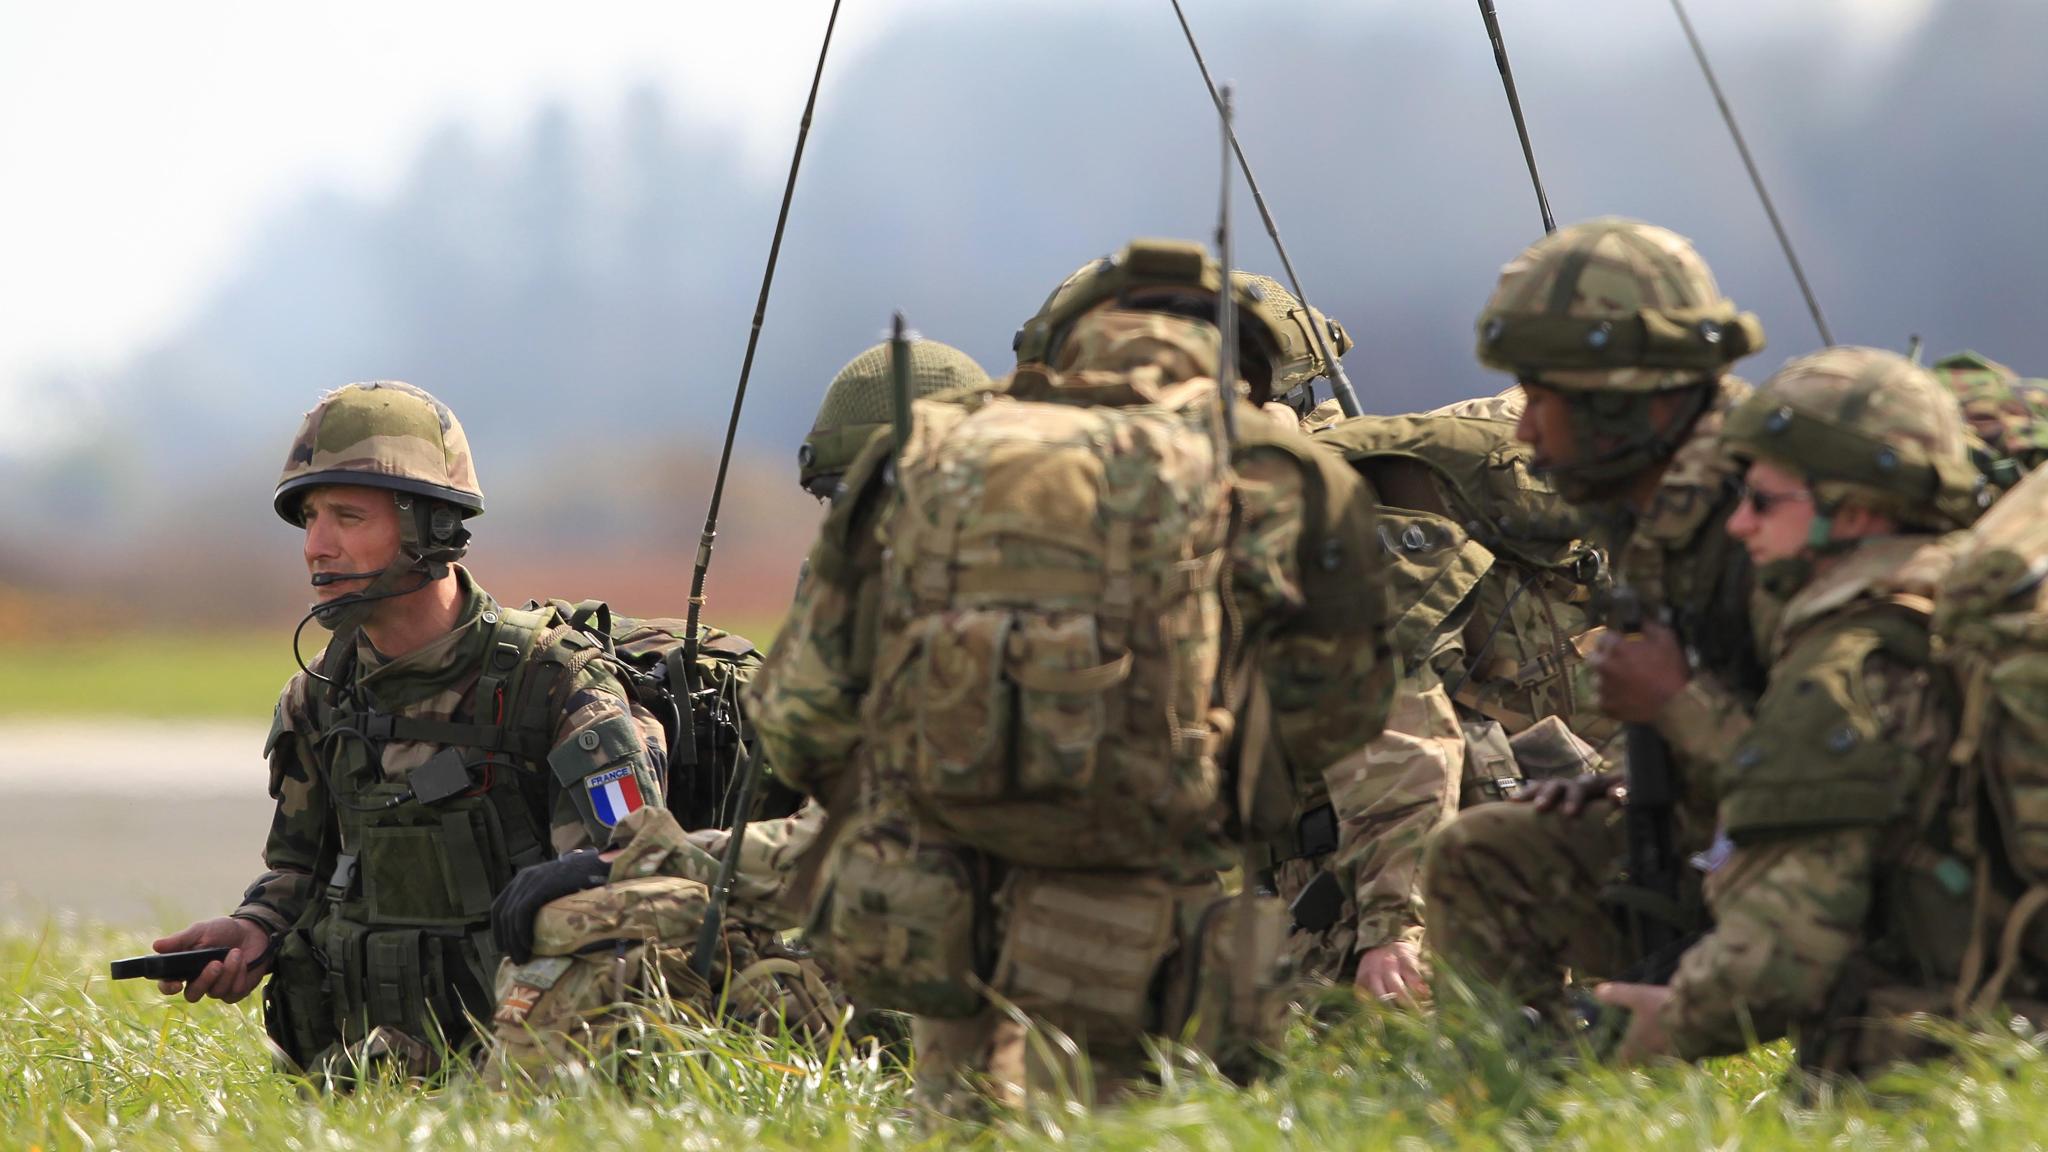 A NATO deployment in Baltics will finish an eight-month long mission amid a battle for air supremacy in Ukraine.